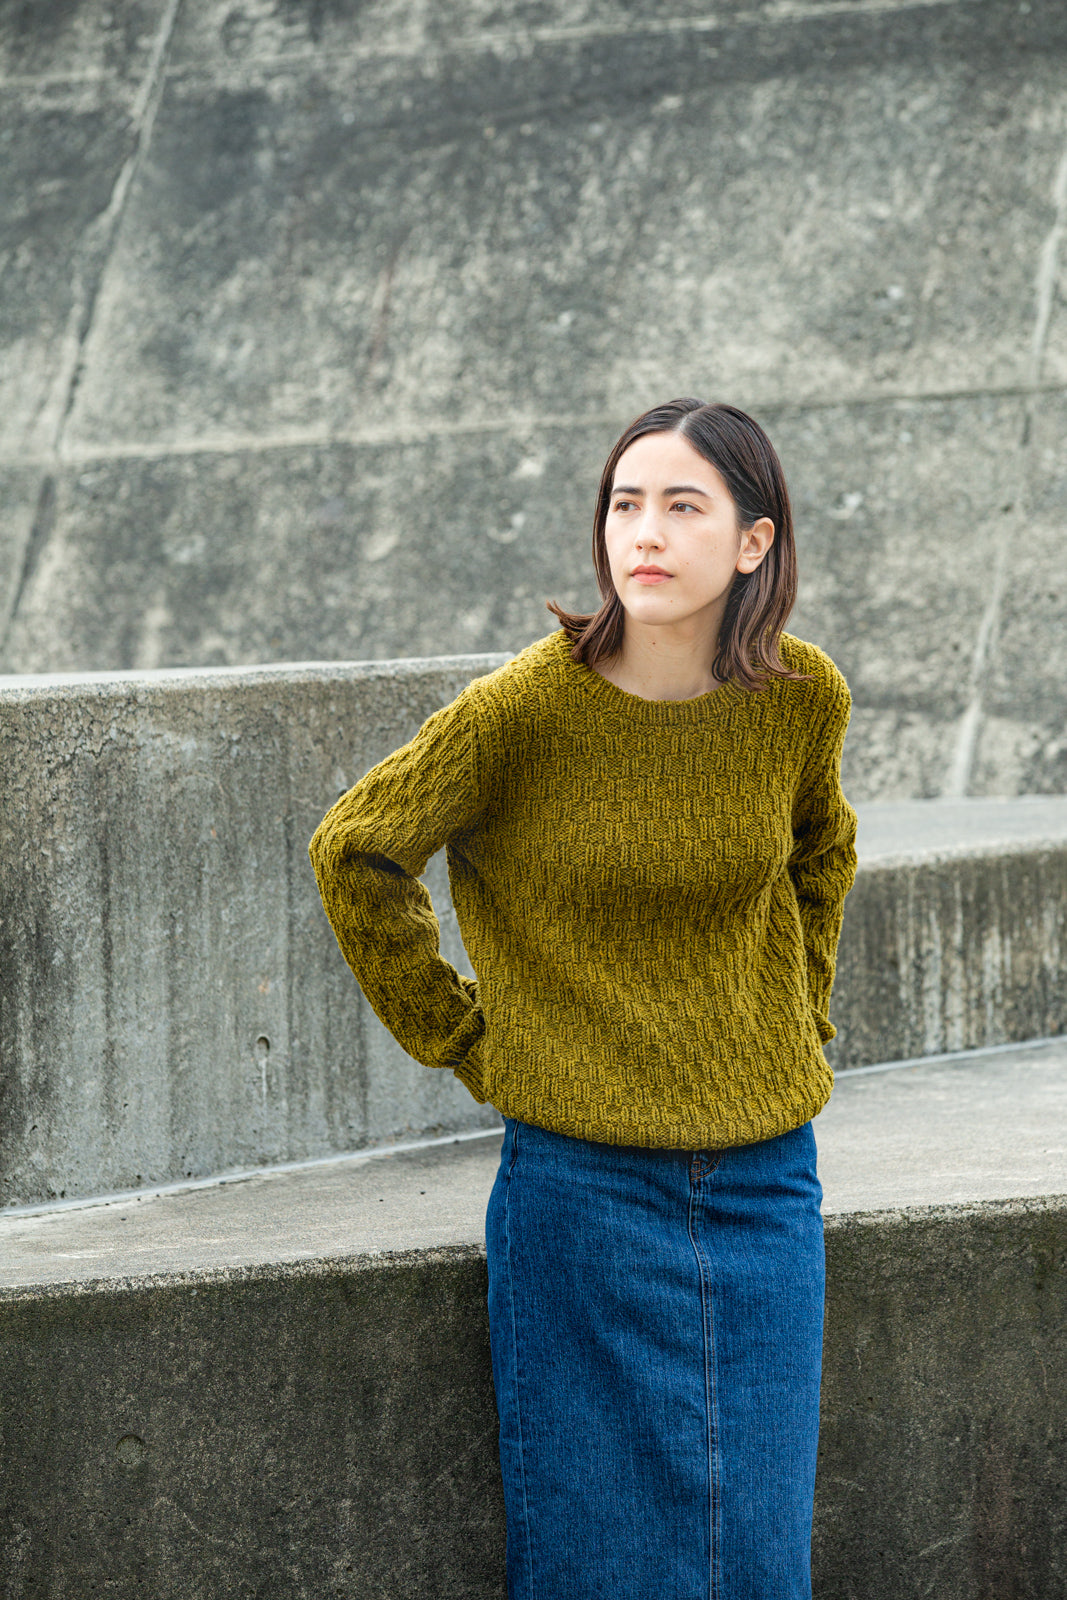 Northern Lights – A Collection with Brooklyn Tweed